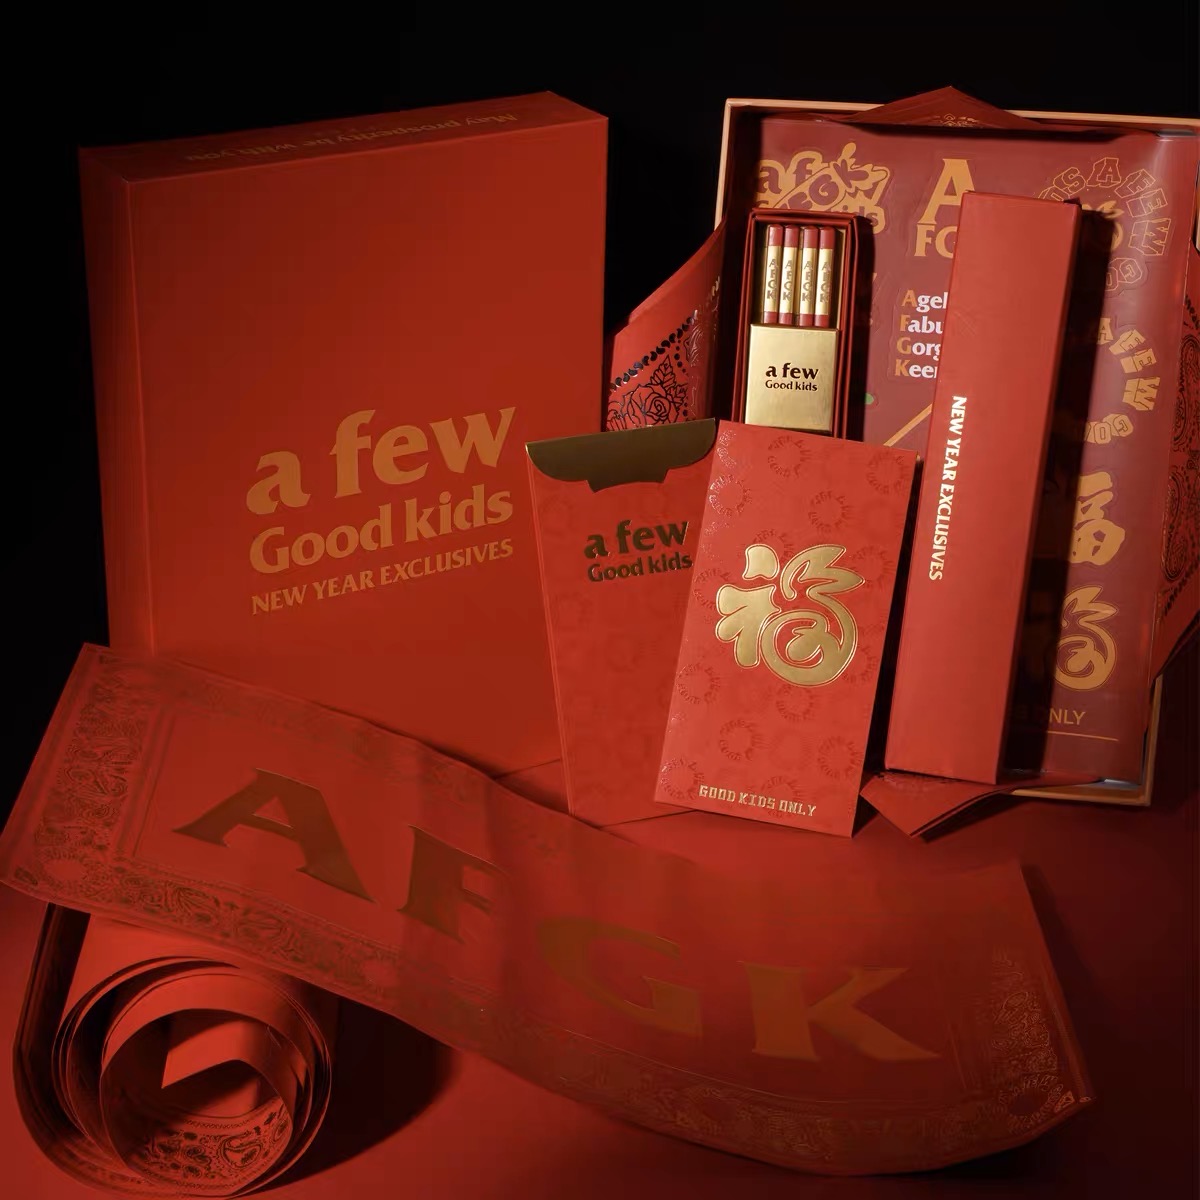 DONCARE(AFGK) "New year exclusive package"